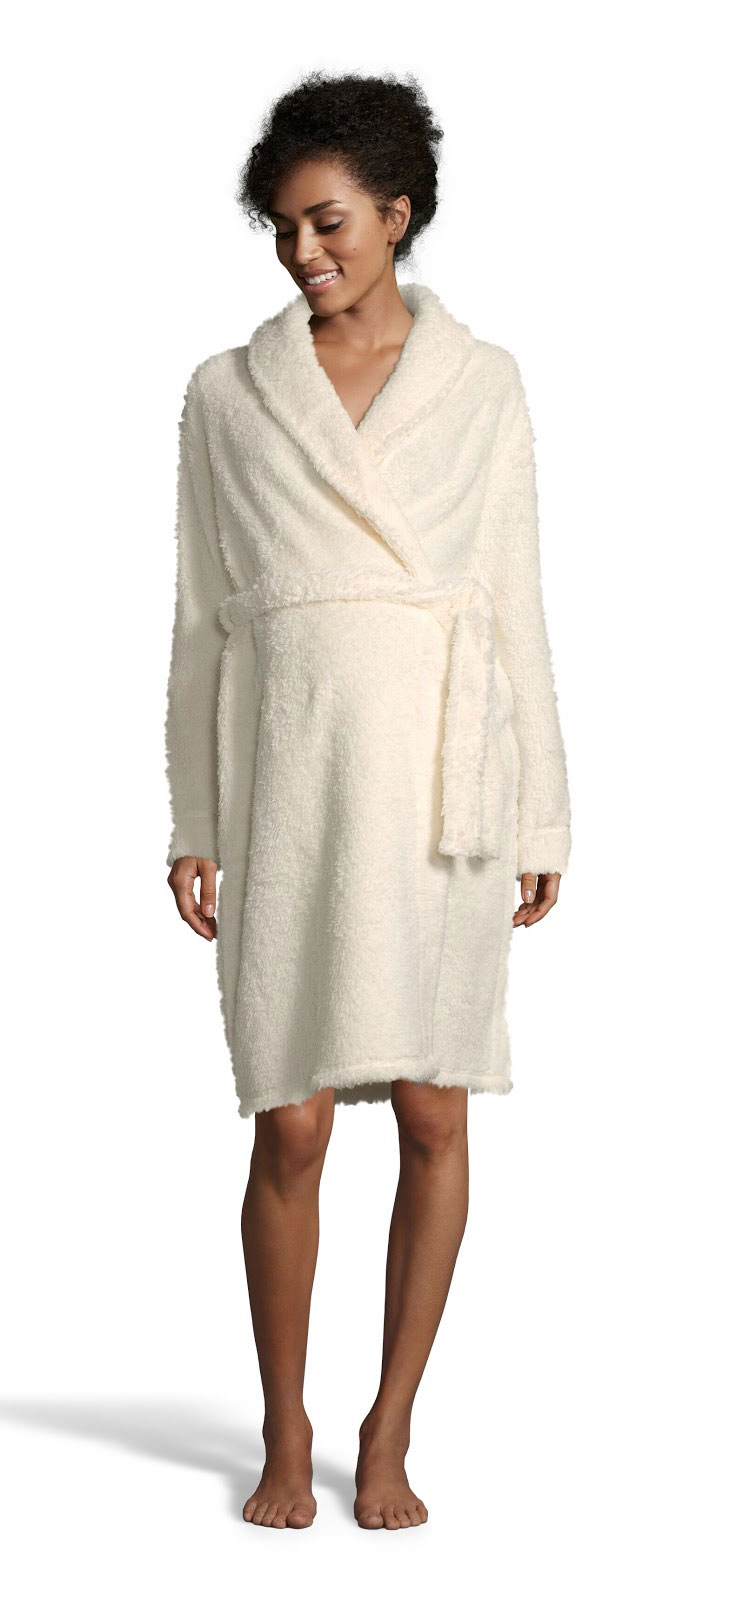 comfy and cozy hospital robe from Lamaze Intimates